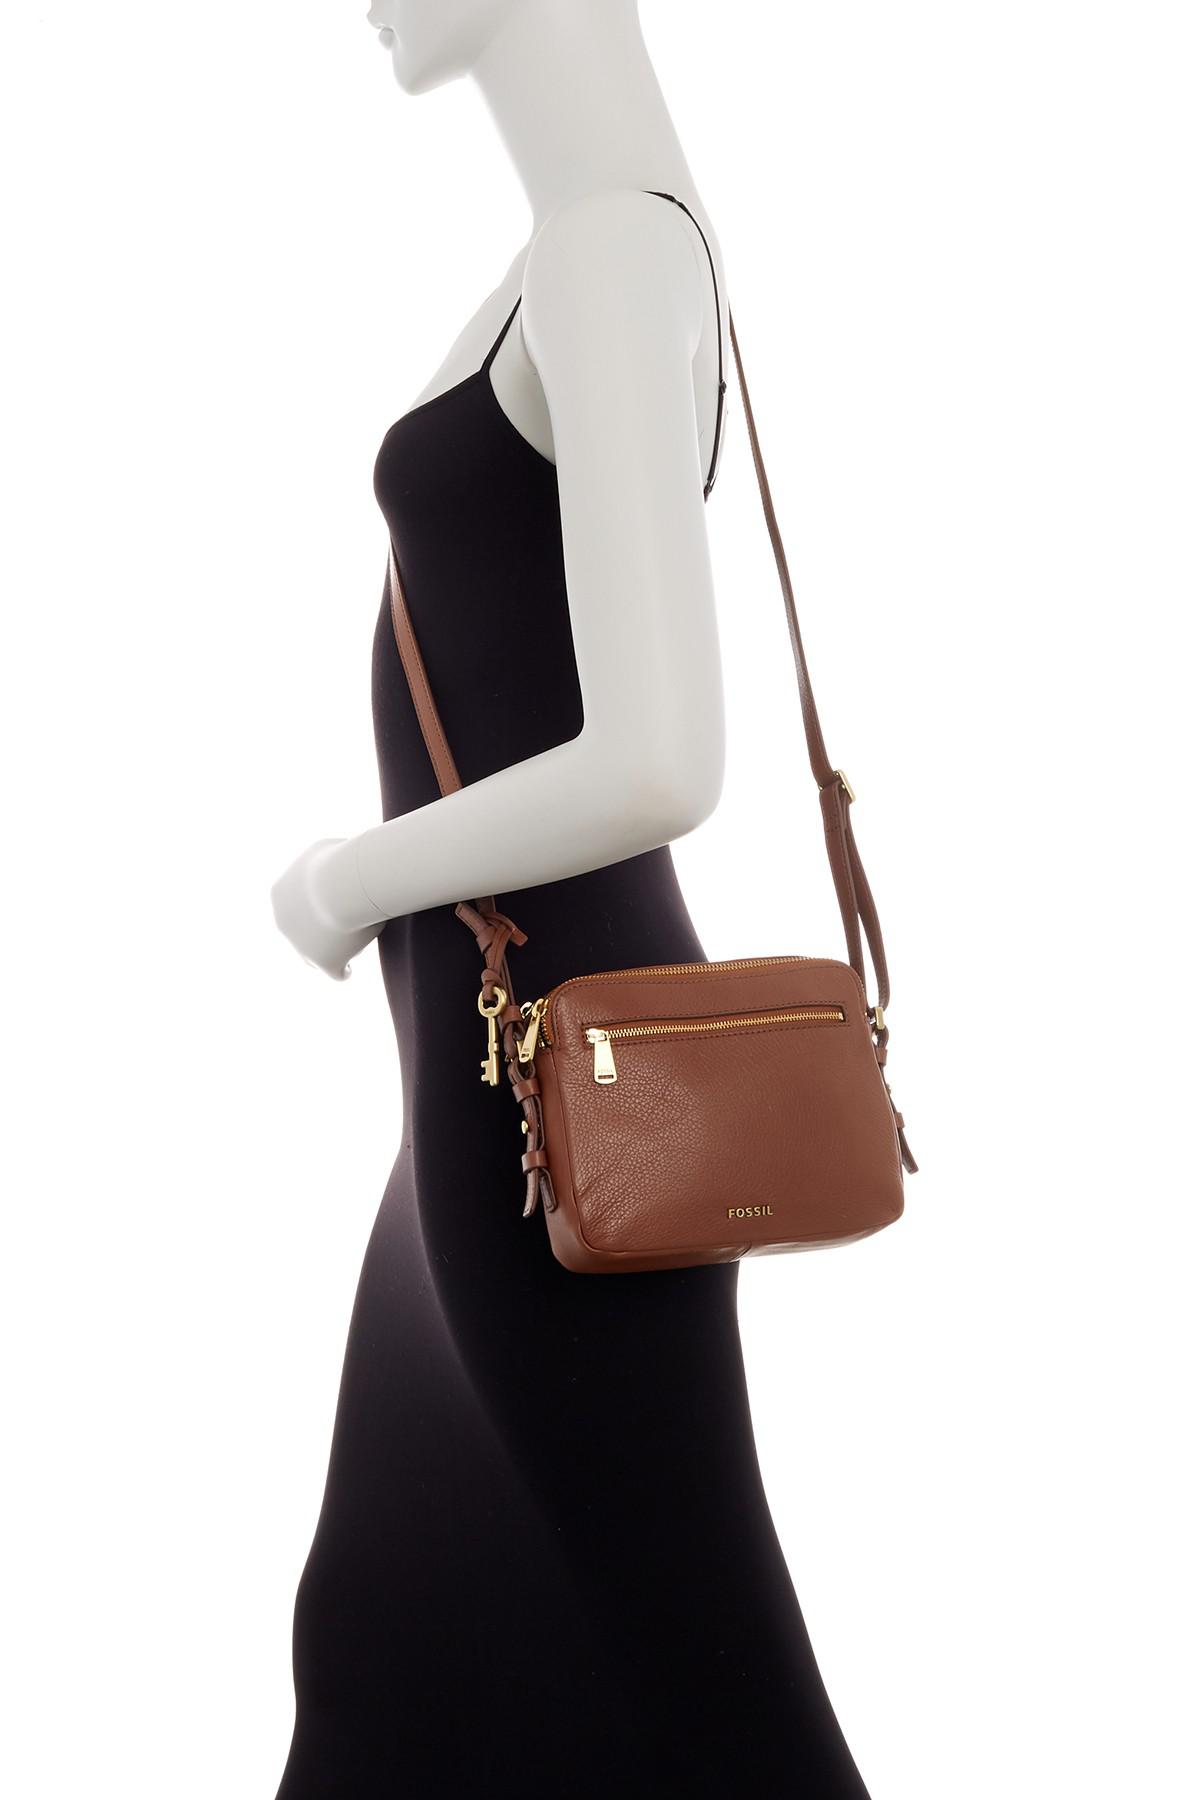 Fossil Piper Toaster Leather Crossbody Bag in Brown | Lyst